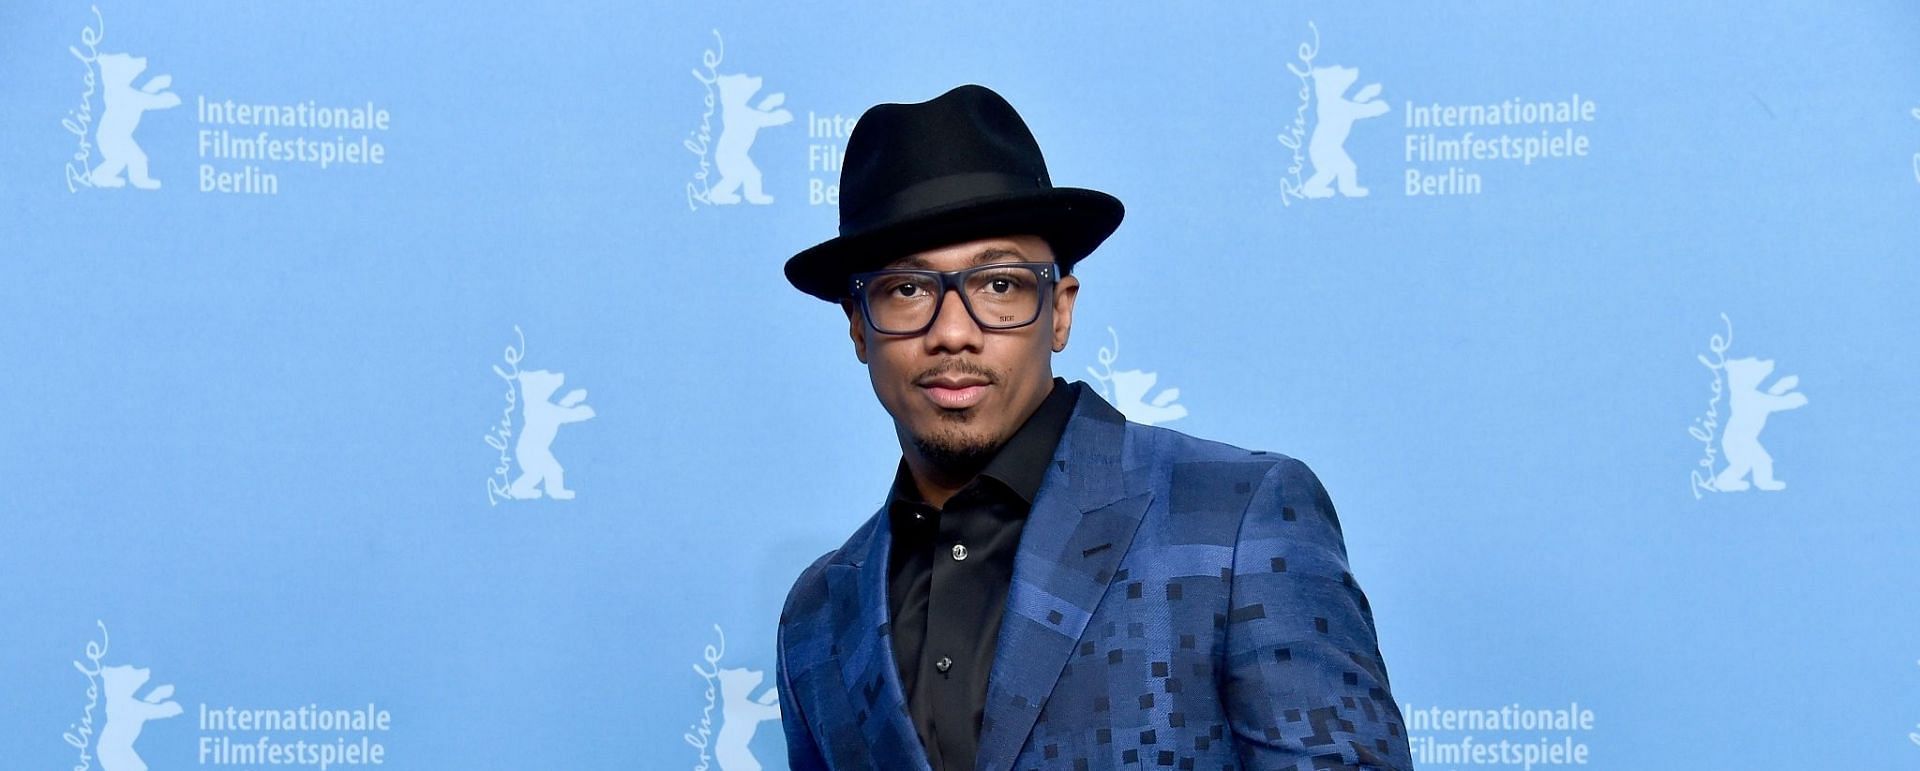 Nick Cannon was diagnosed with lupus nephritis in 2012 (Image via Pascal Le Segretain/Getty Images)